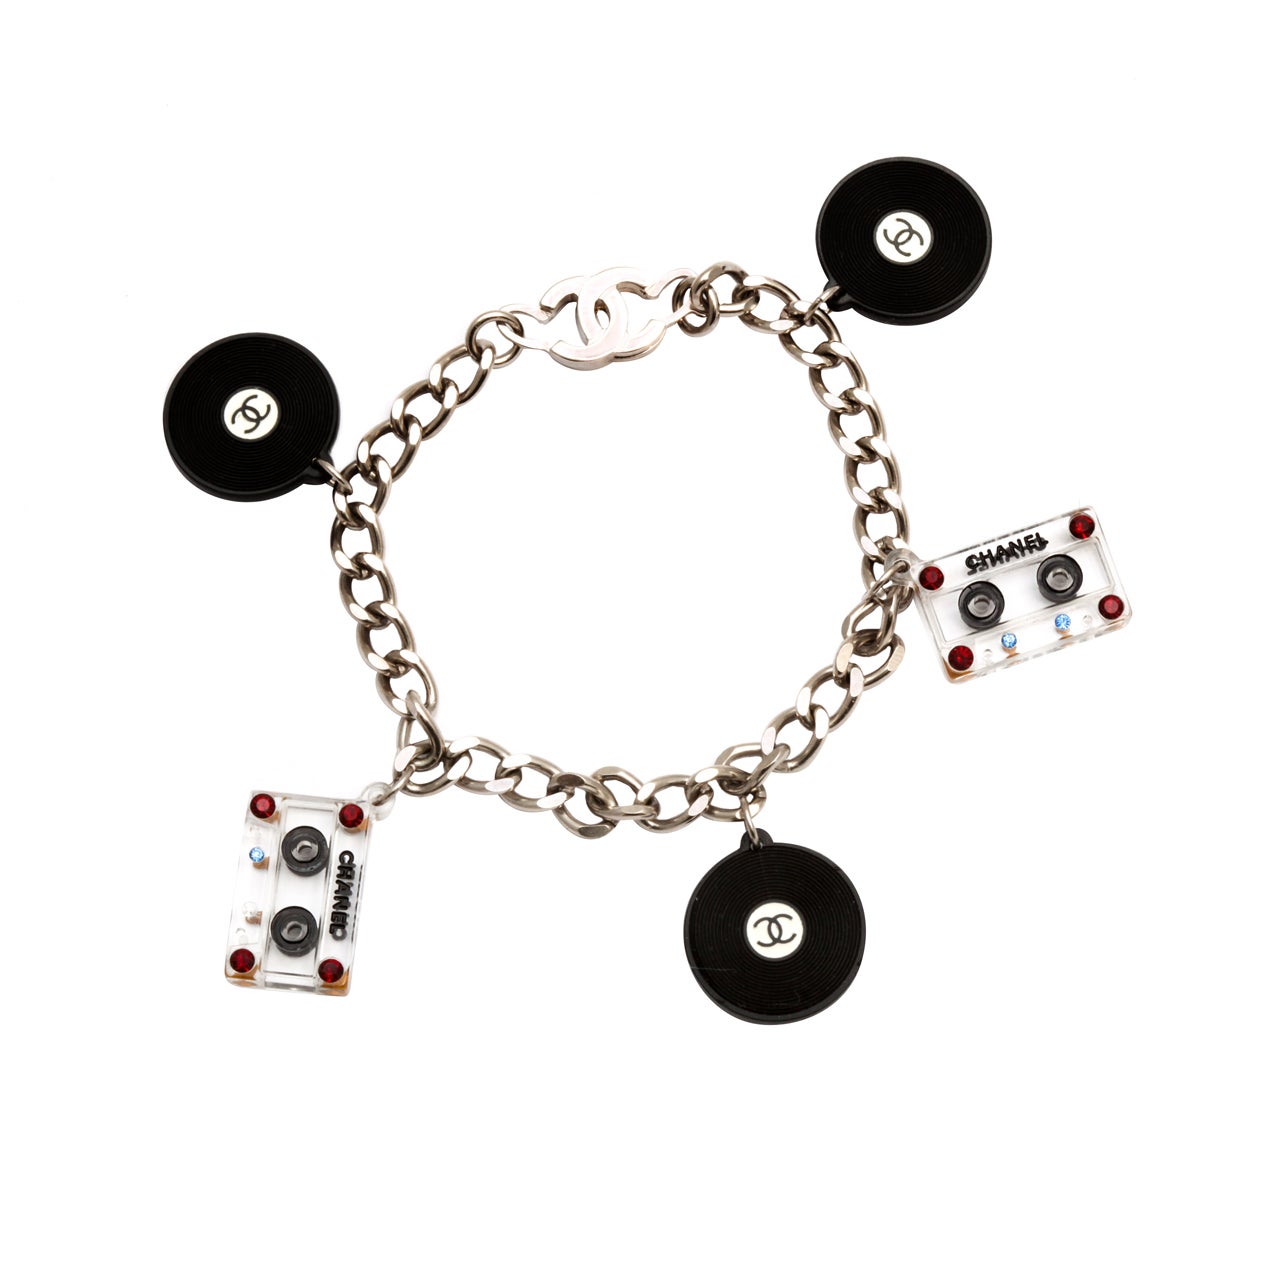 CHANEL CASSETTE TAPE AND RECORD MOTIF BRACELET at 1stdibs